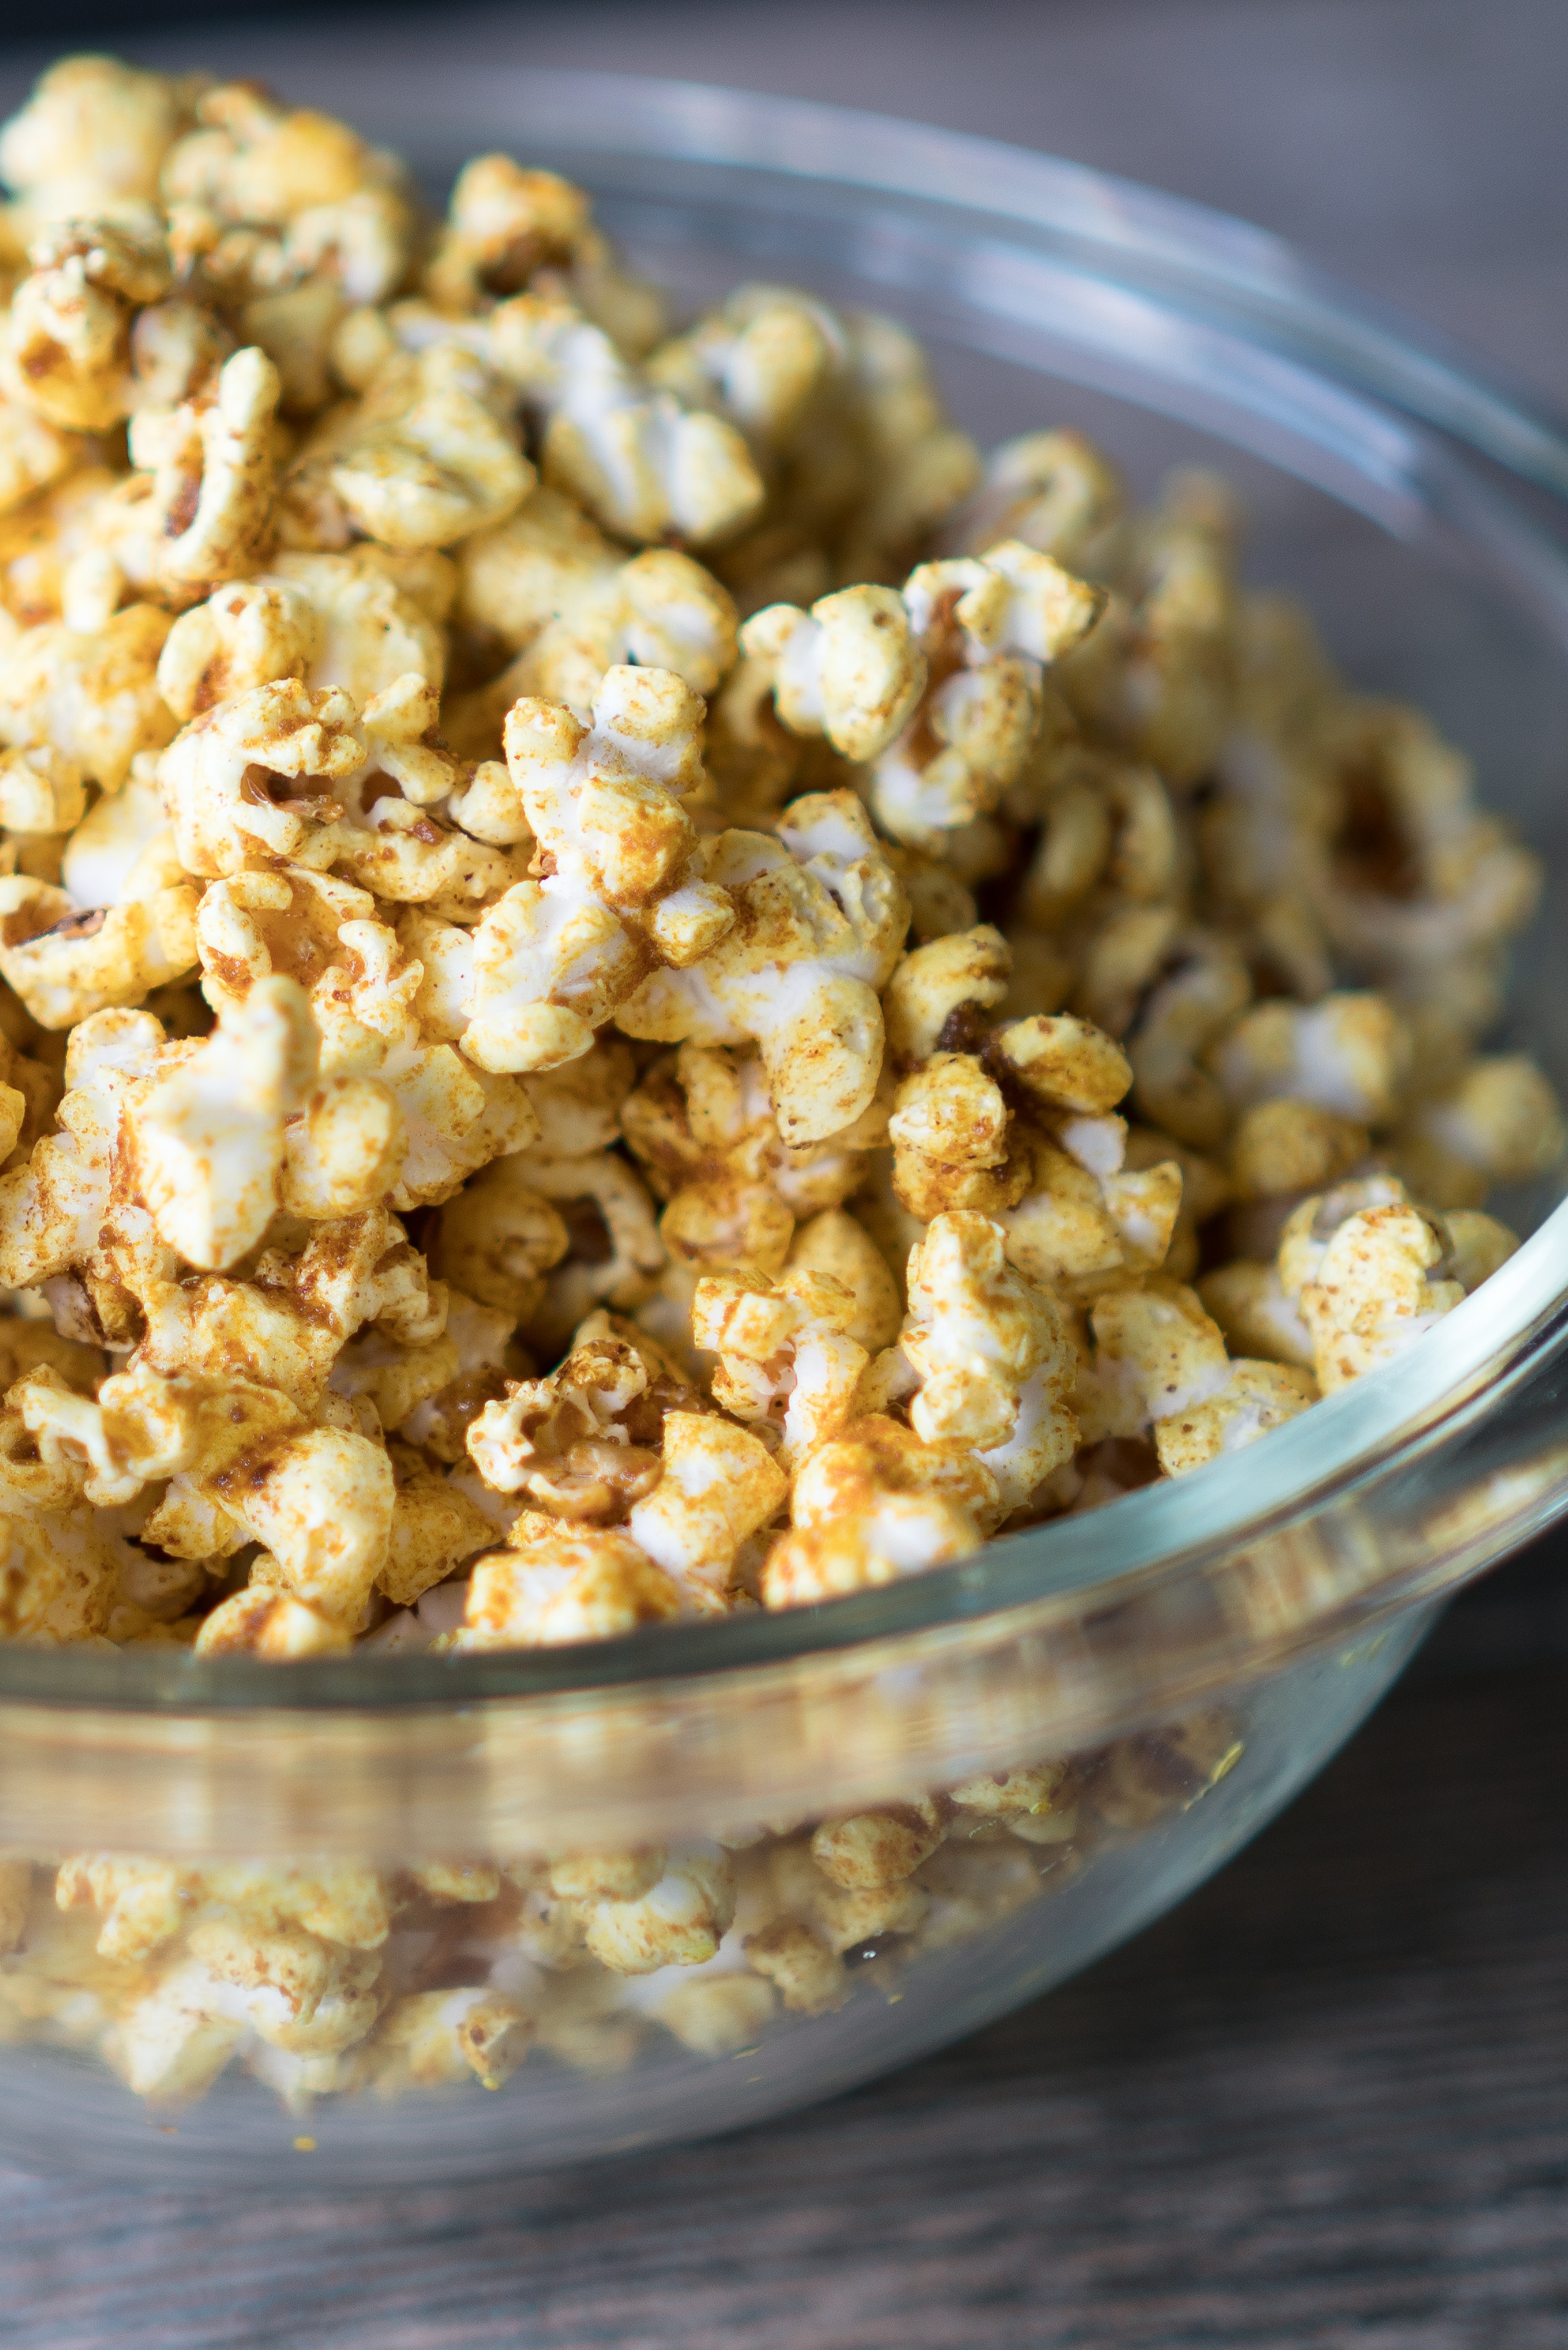 Sweet and Salty Curry Popcorn – Easy recipe for homemade Sweet and Salty Curry Popcorn. This gluten-free, vegan-friendly popcorn is spiced with curry powder, garlic powder, cinnamon, coconut sugar, and cayenne! Popped in coconut oil for a dose of healthy fats, this is perfect for at home movie nights or afternoon snacking! ♥ | freeyourfork.com